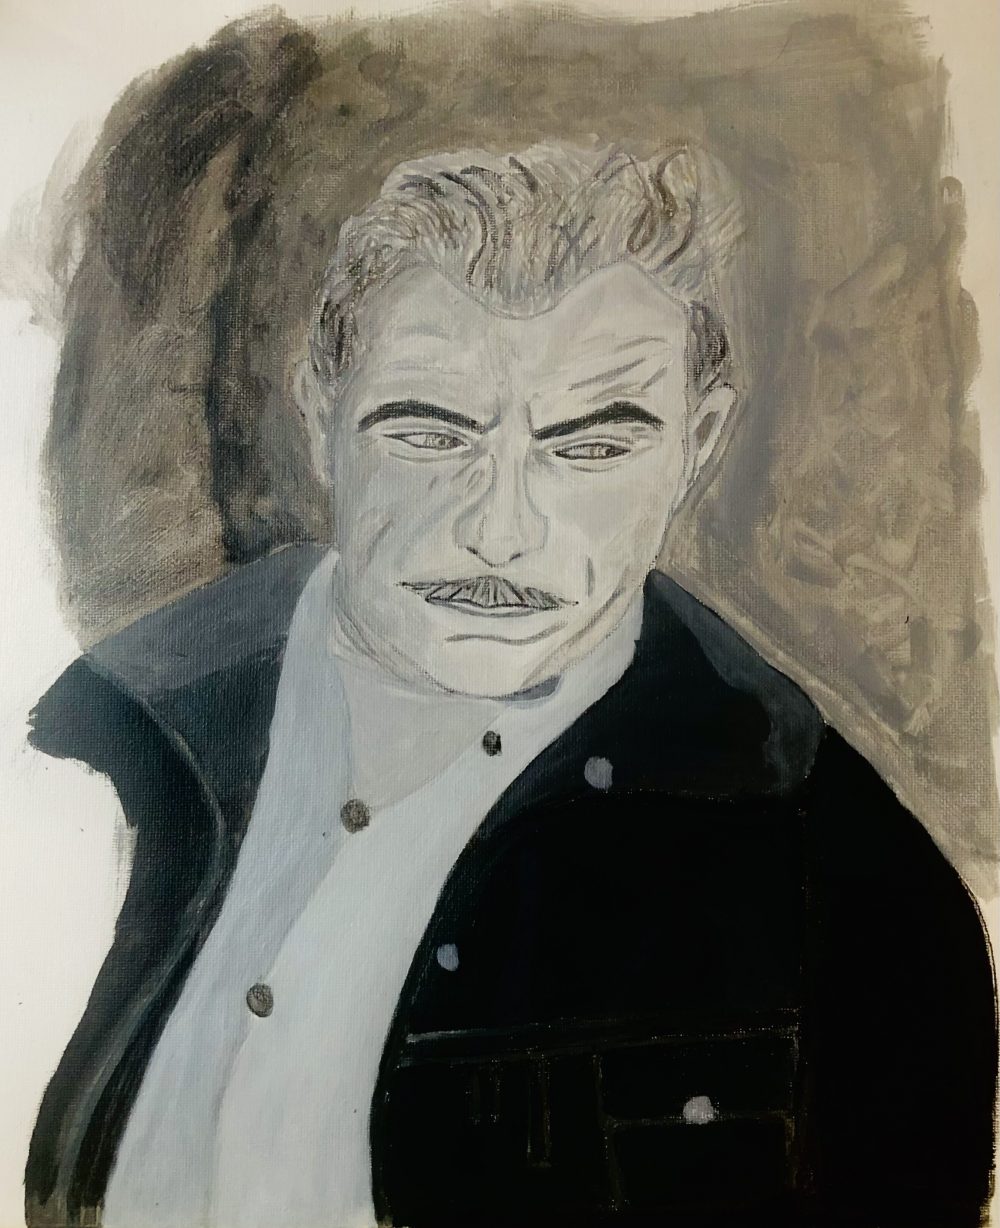 A black and white painting of a man's face with a mustache.